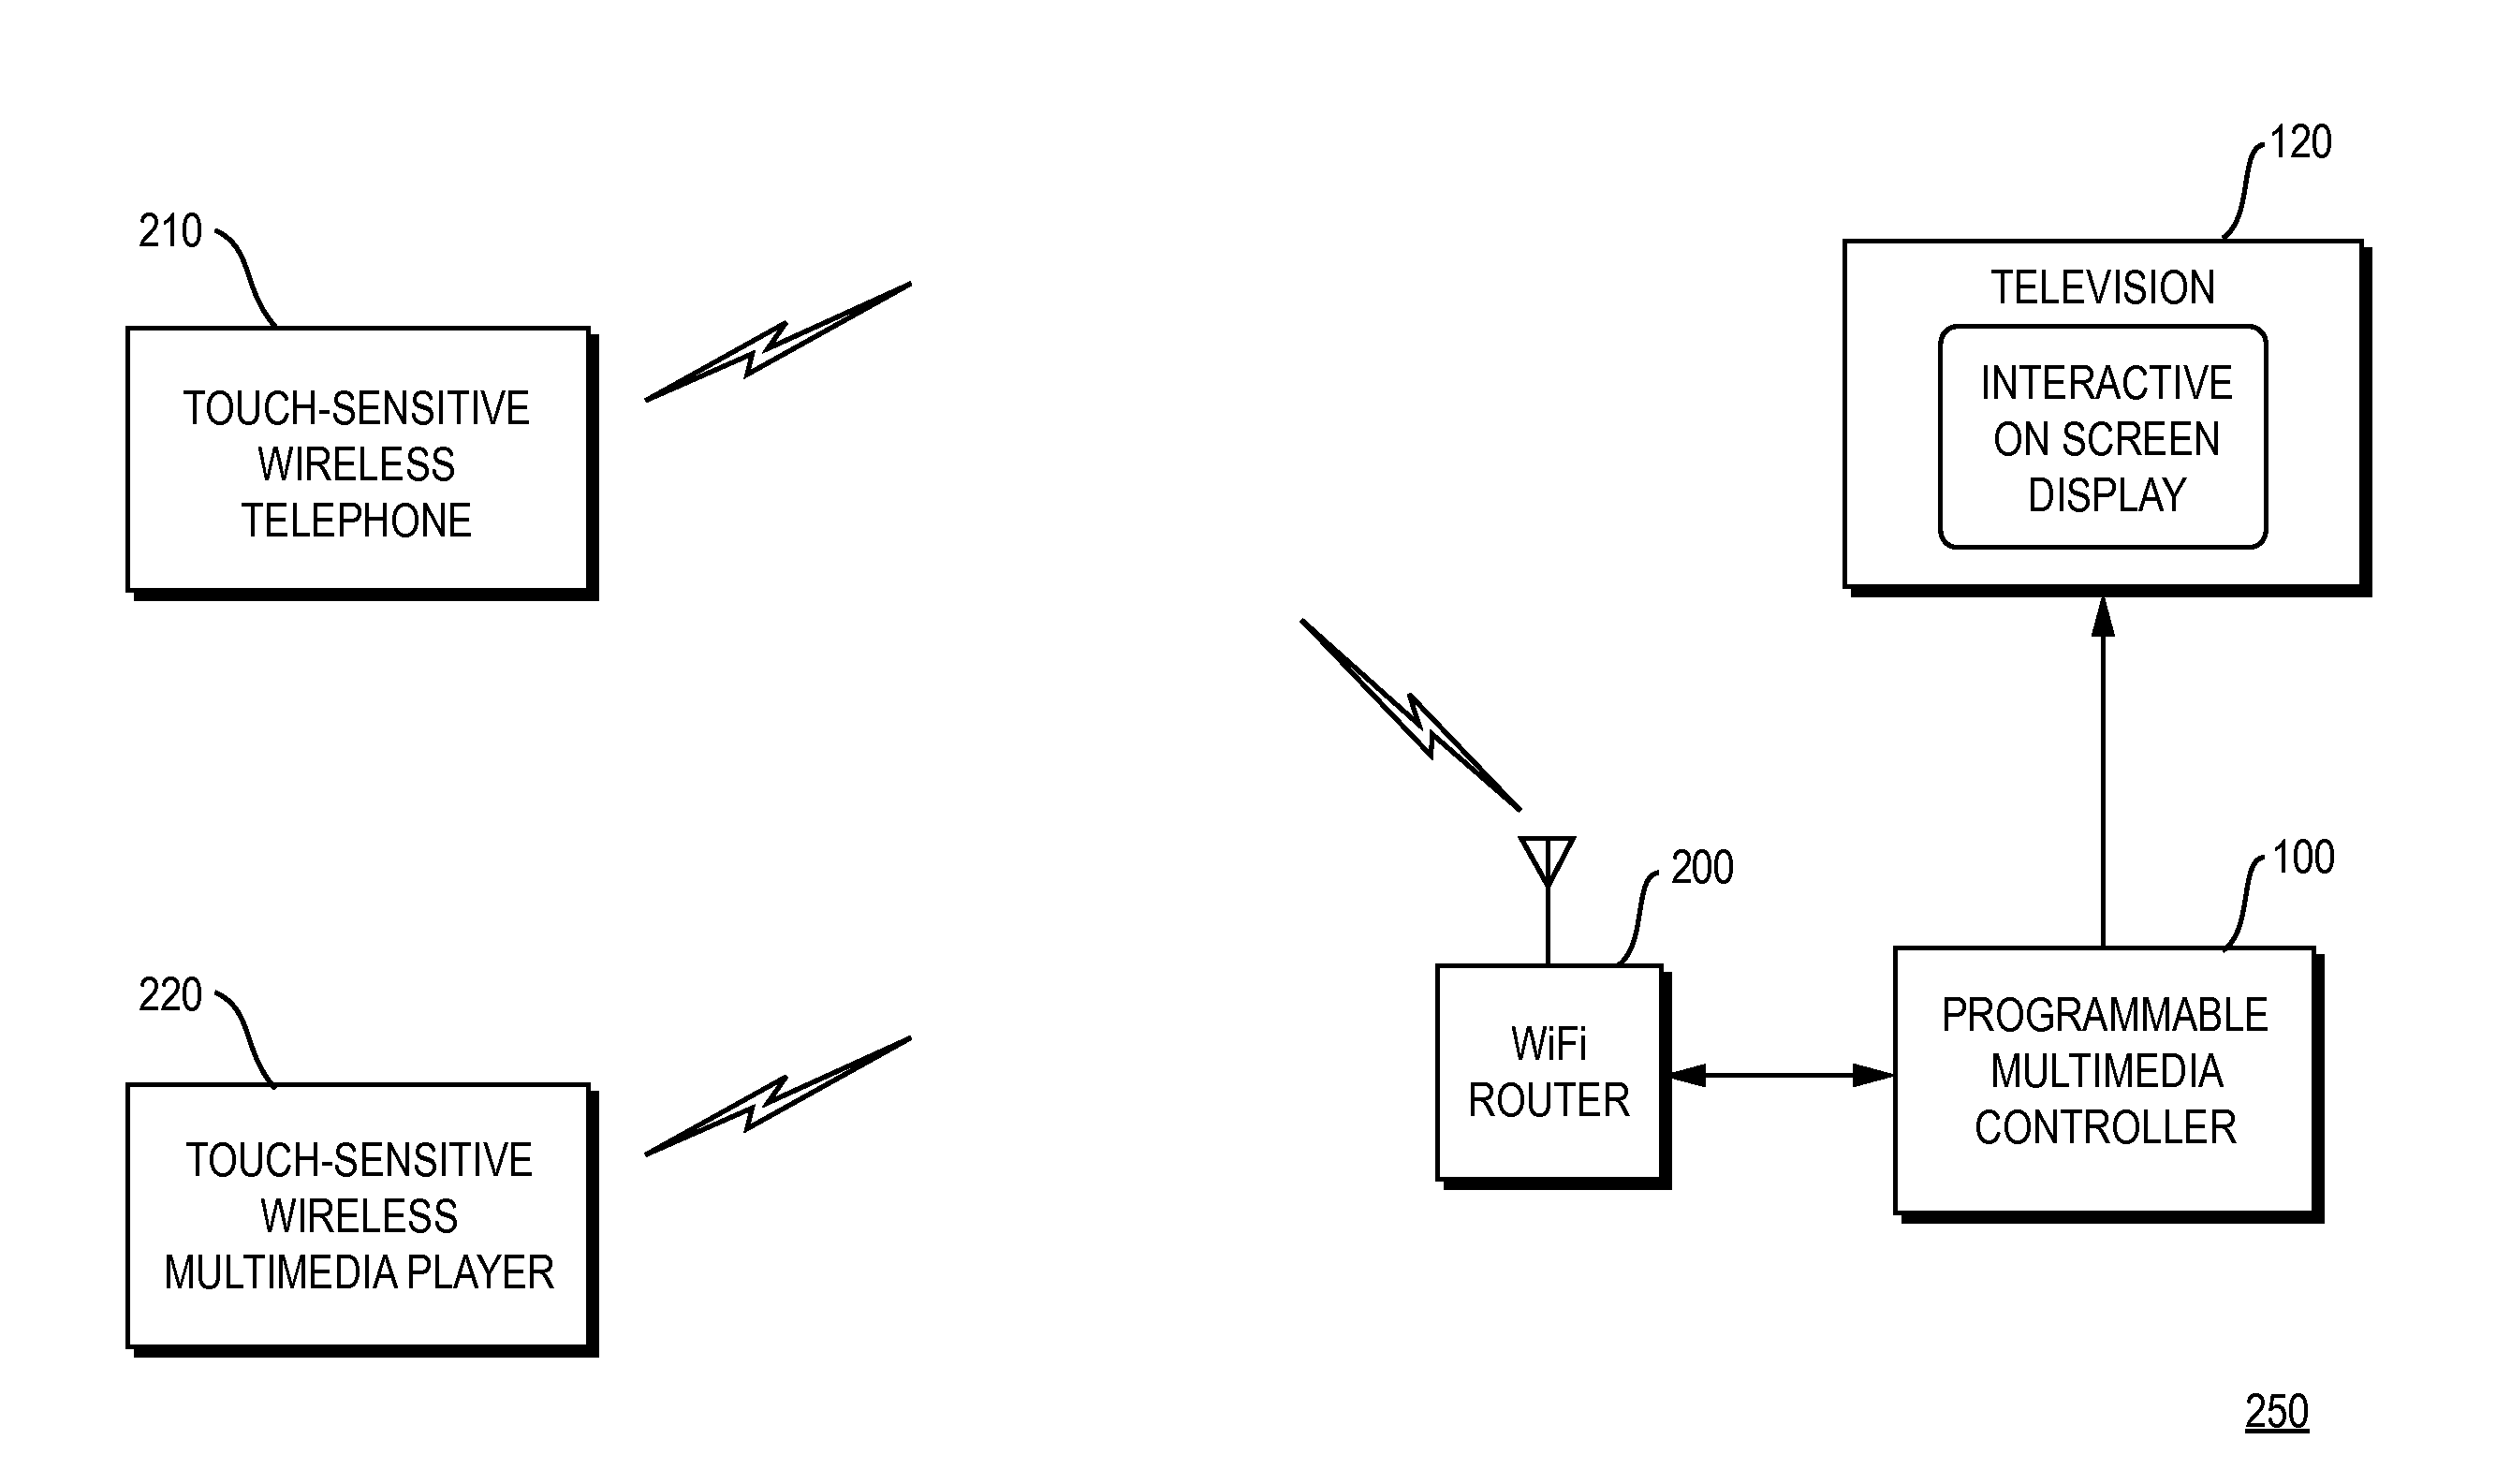 Touch-sensitive wireless device and on screen display for remotely controlling a system